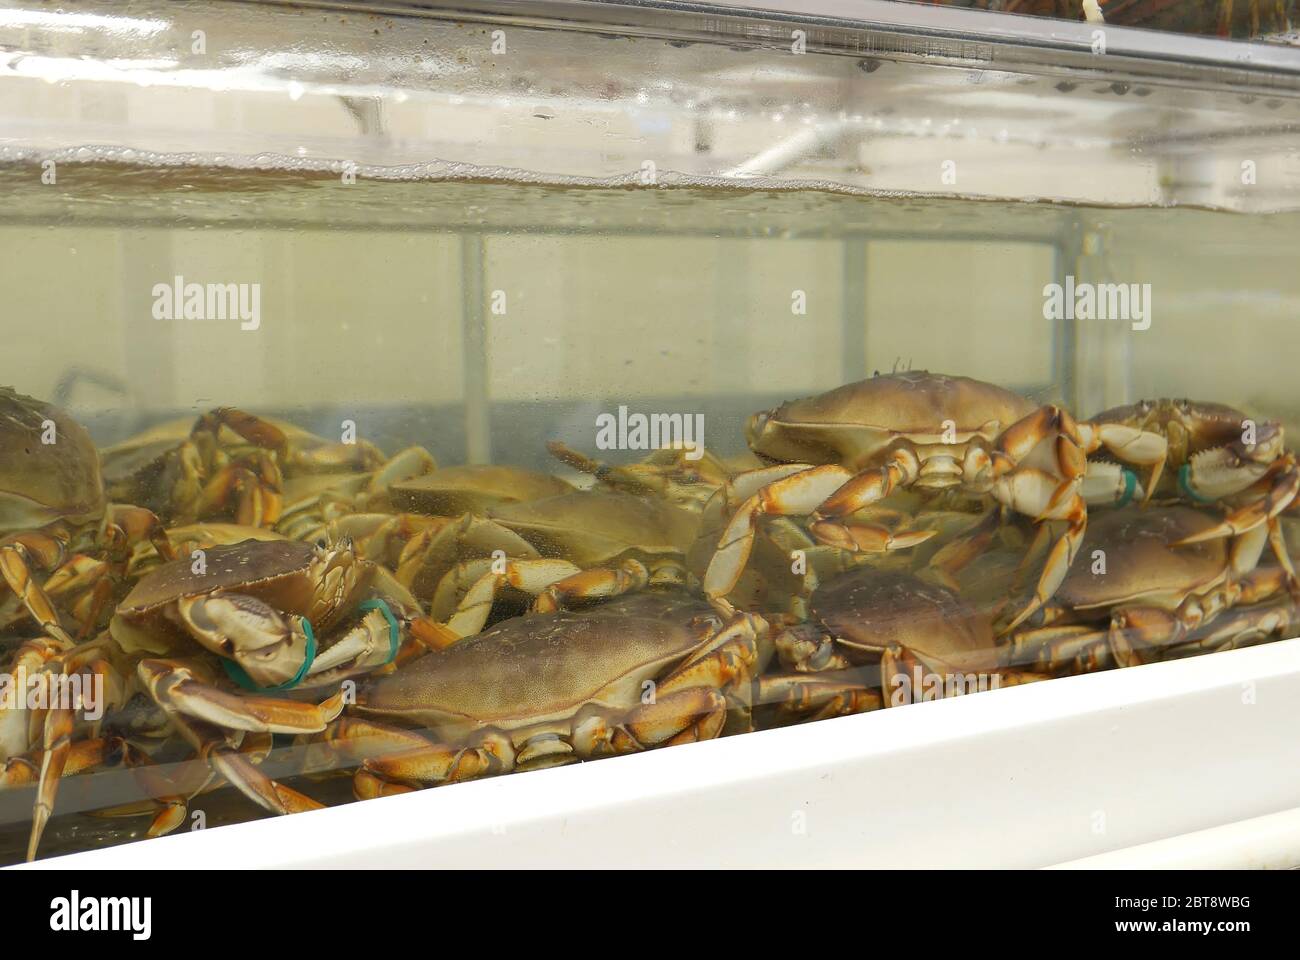 Motion of live crabs in the tank at superstore Stock Photo